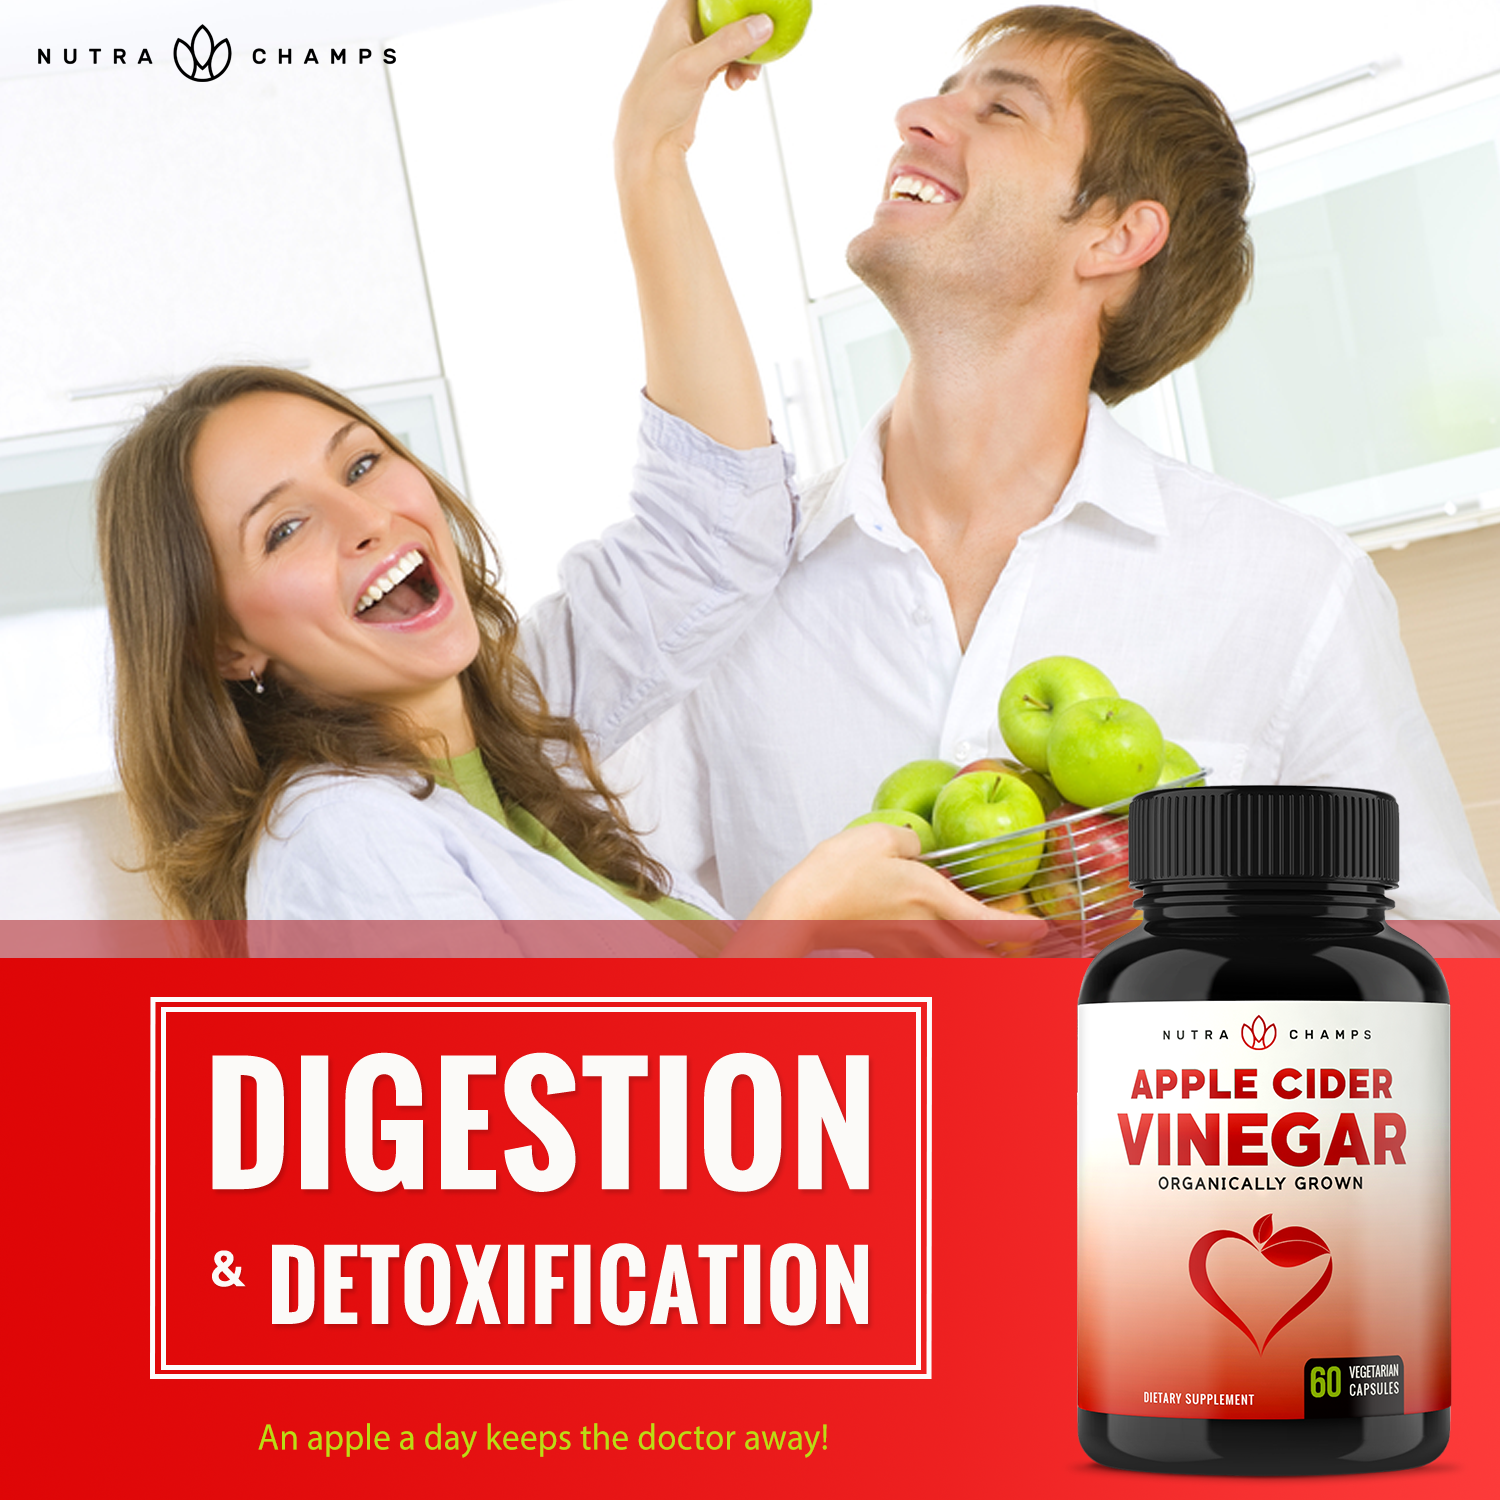 Graphic of a Male and Female Couple Eating apples with the NutraChamps Apple Cider Vinegar Supplement Bottle in the bottom right Corner and a “Digestion and Detoxification" Text Box 